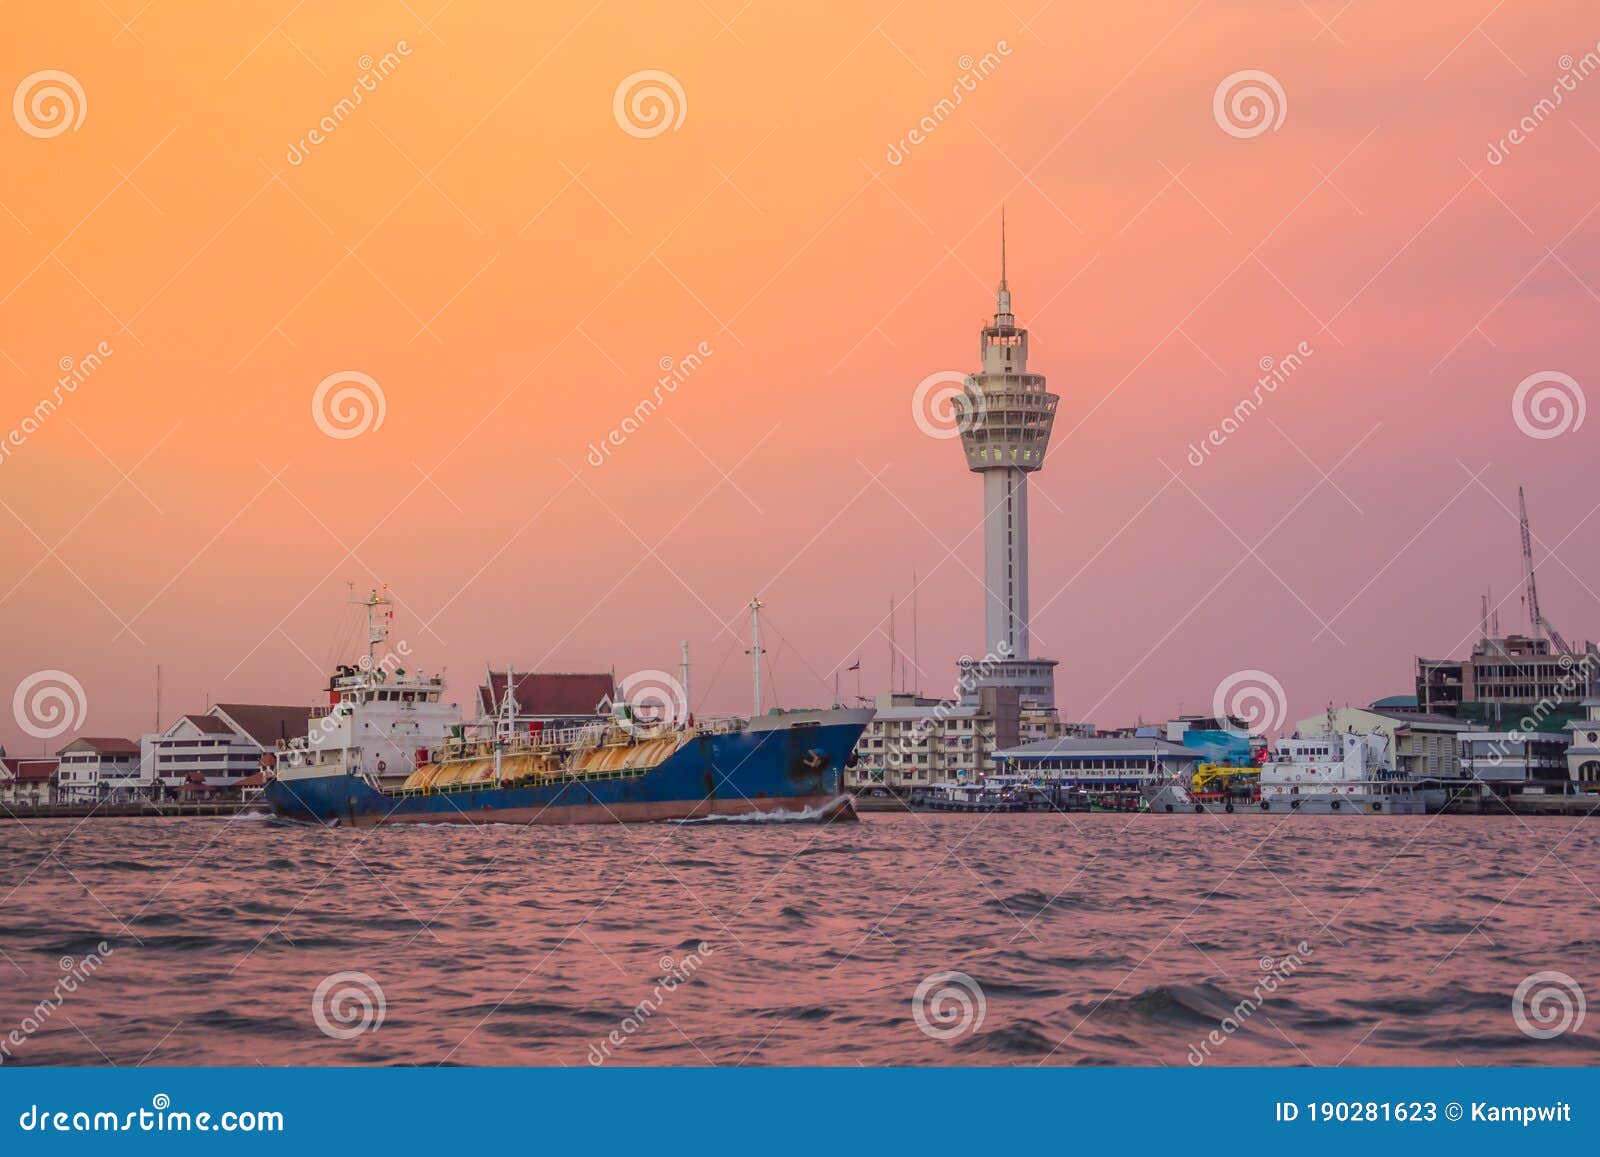 Riverfront View Of Samut Prakan City Hall With New Observation Tower And Boat Pier Samut Prakan Is At The Mouth Of The Chao Stock Image Image Of Market Lighthouse